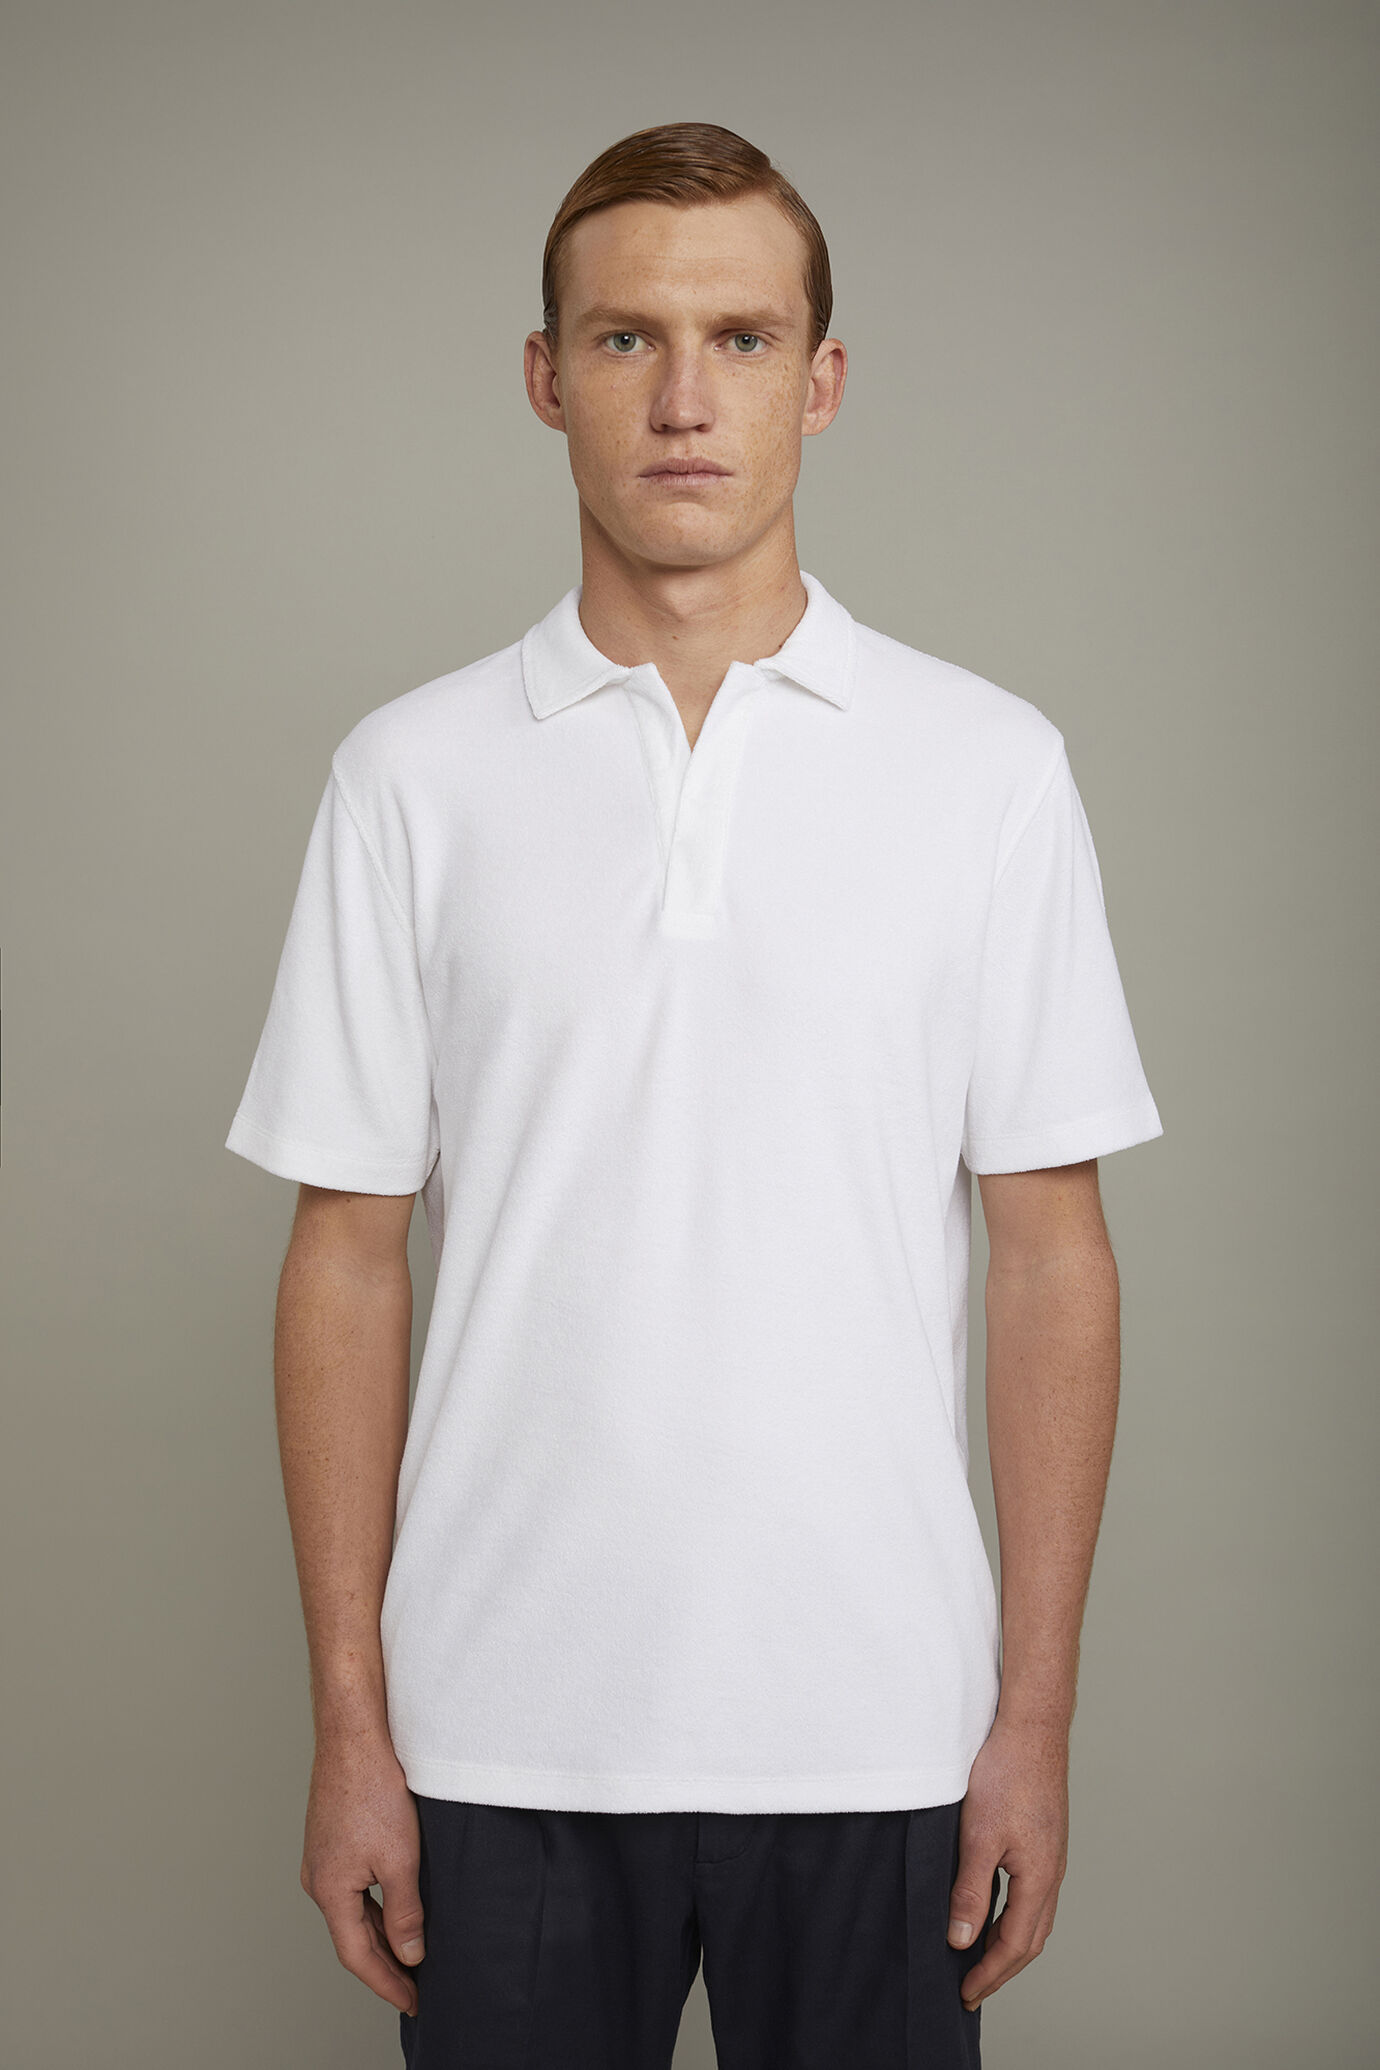 Men’s short sleeve polo shirt with terry fabric and derby collar regular fit